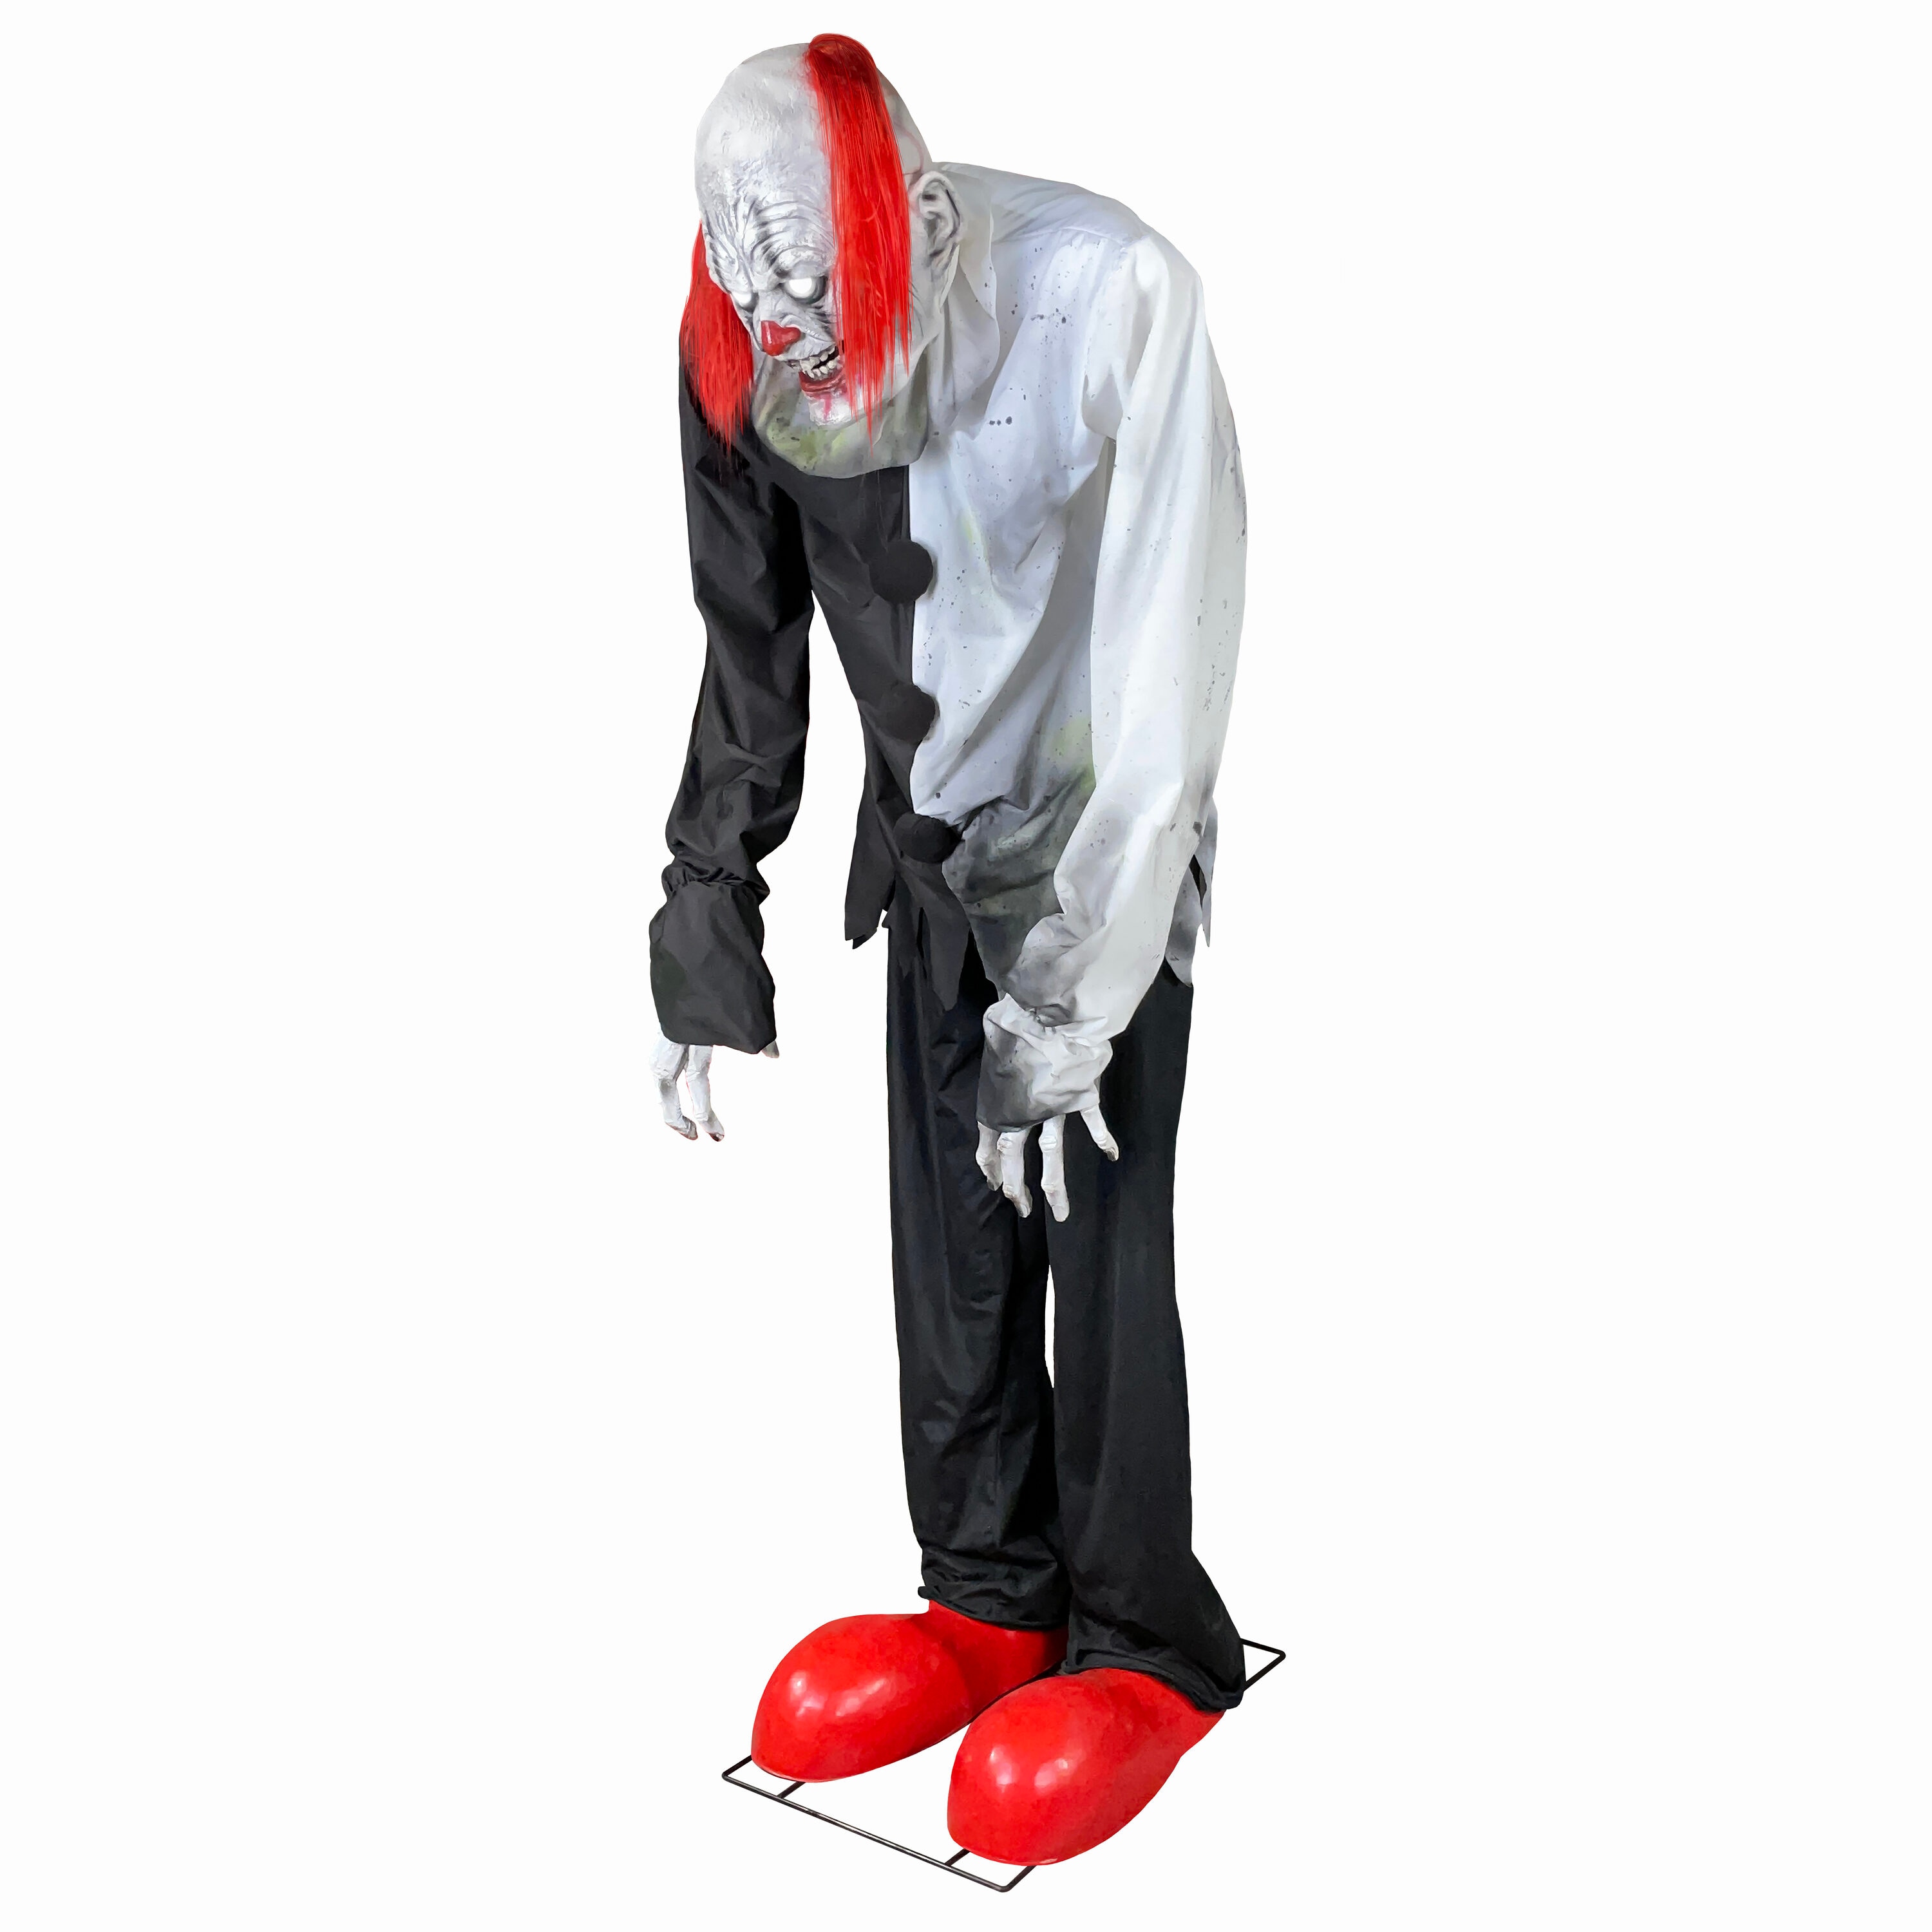 Haunted Living 8-ft Lighted Animatronic Clown on Stilts at Lowes.com